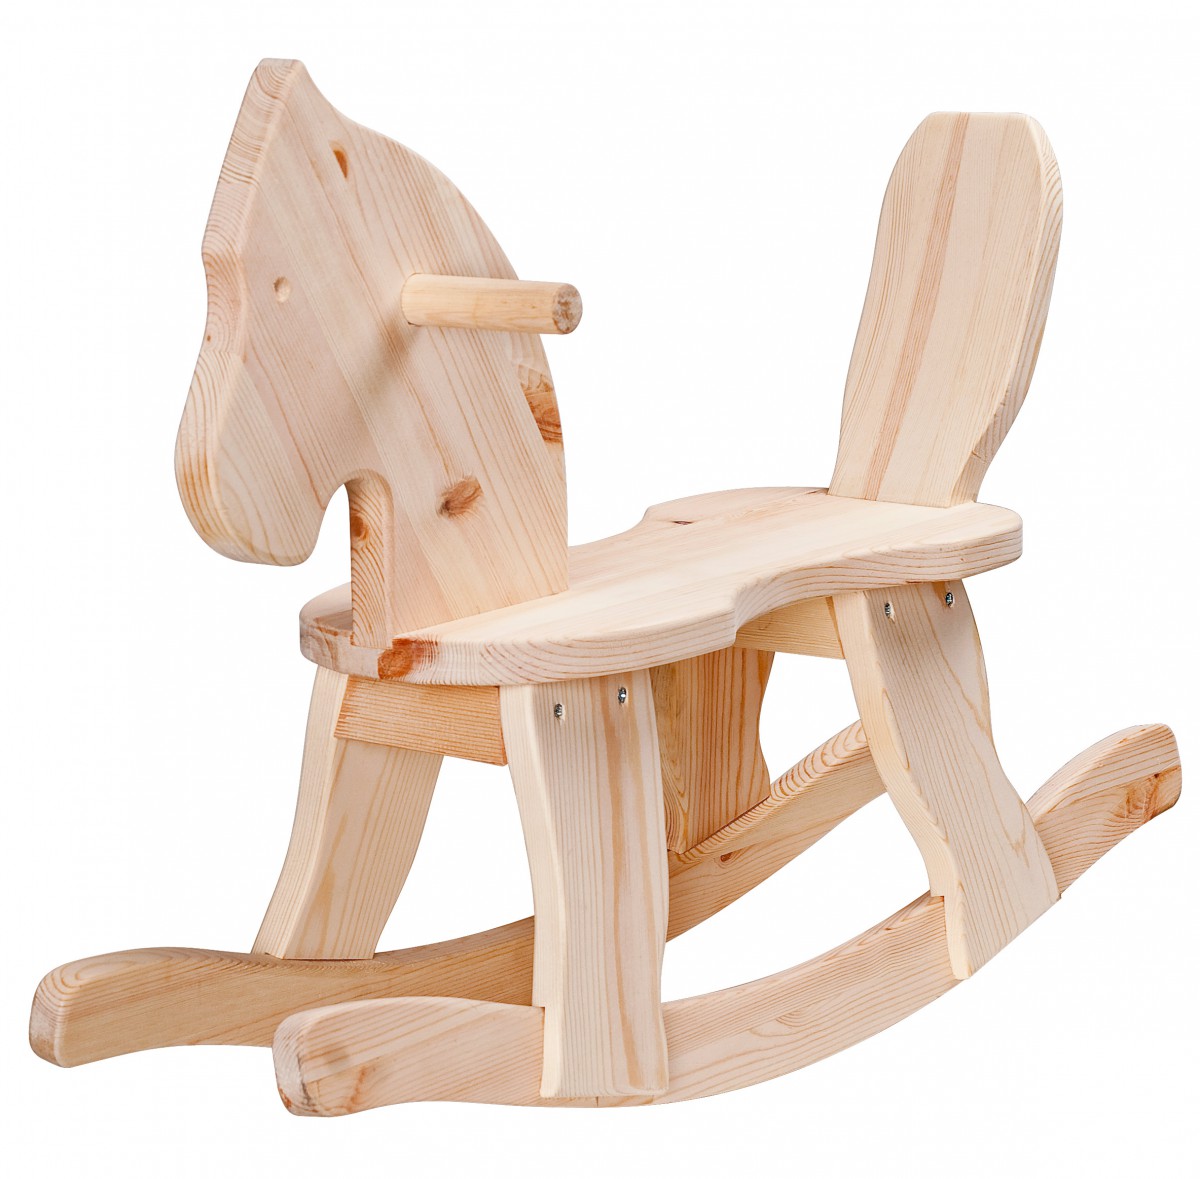 How to Build a Child's Rocking Horse - Woodworking Project